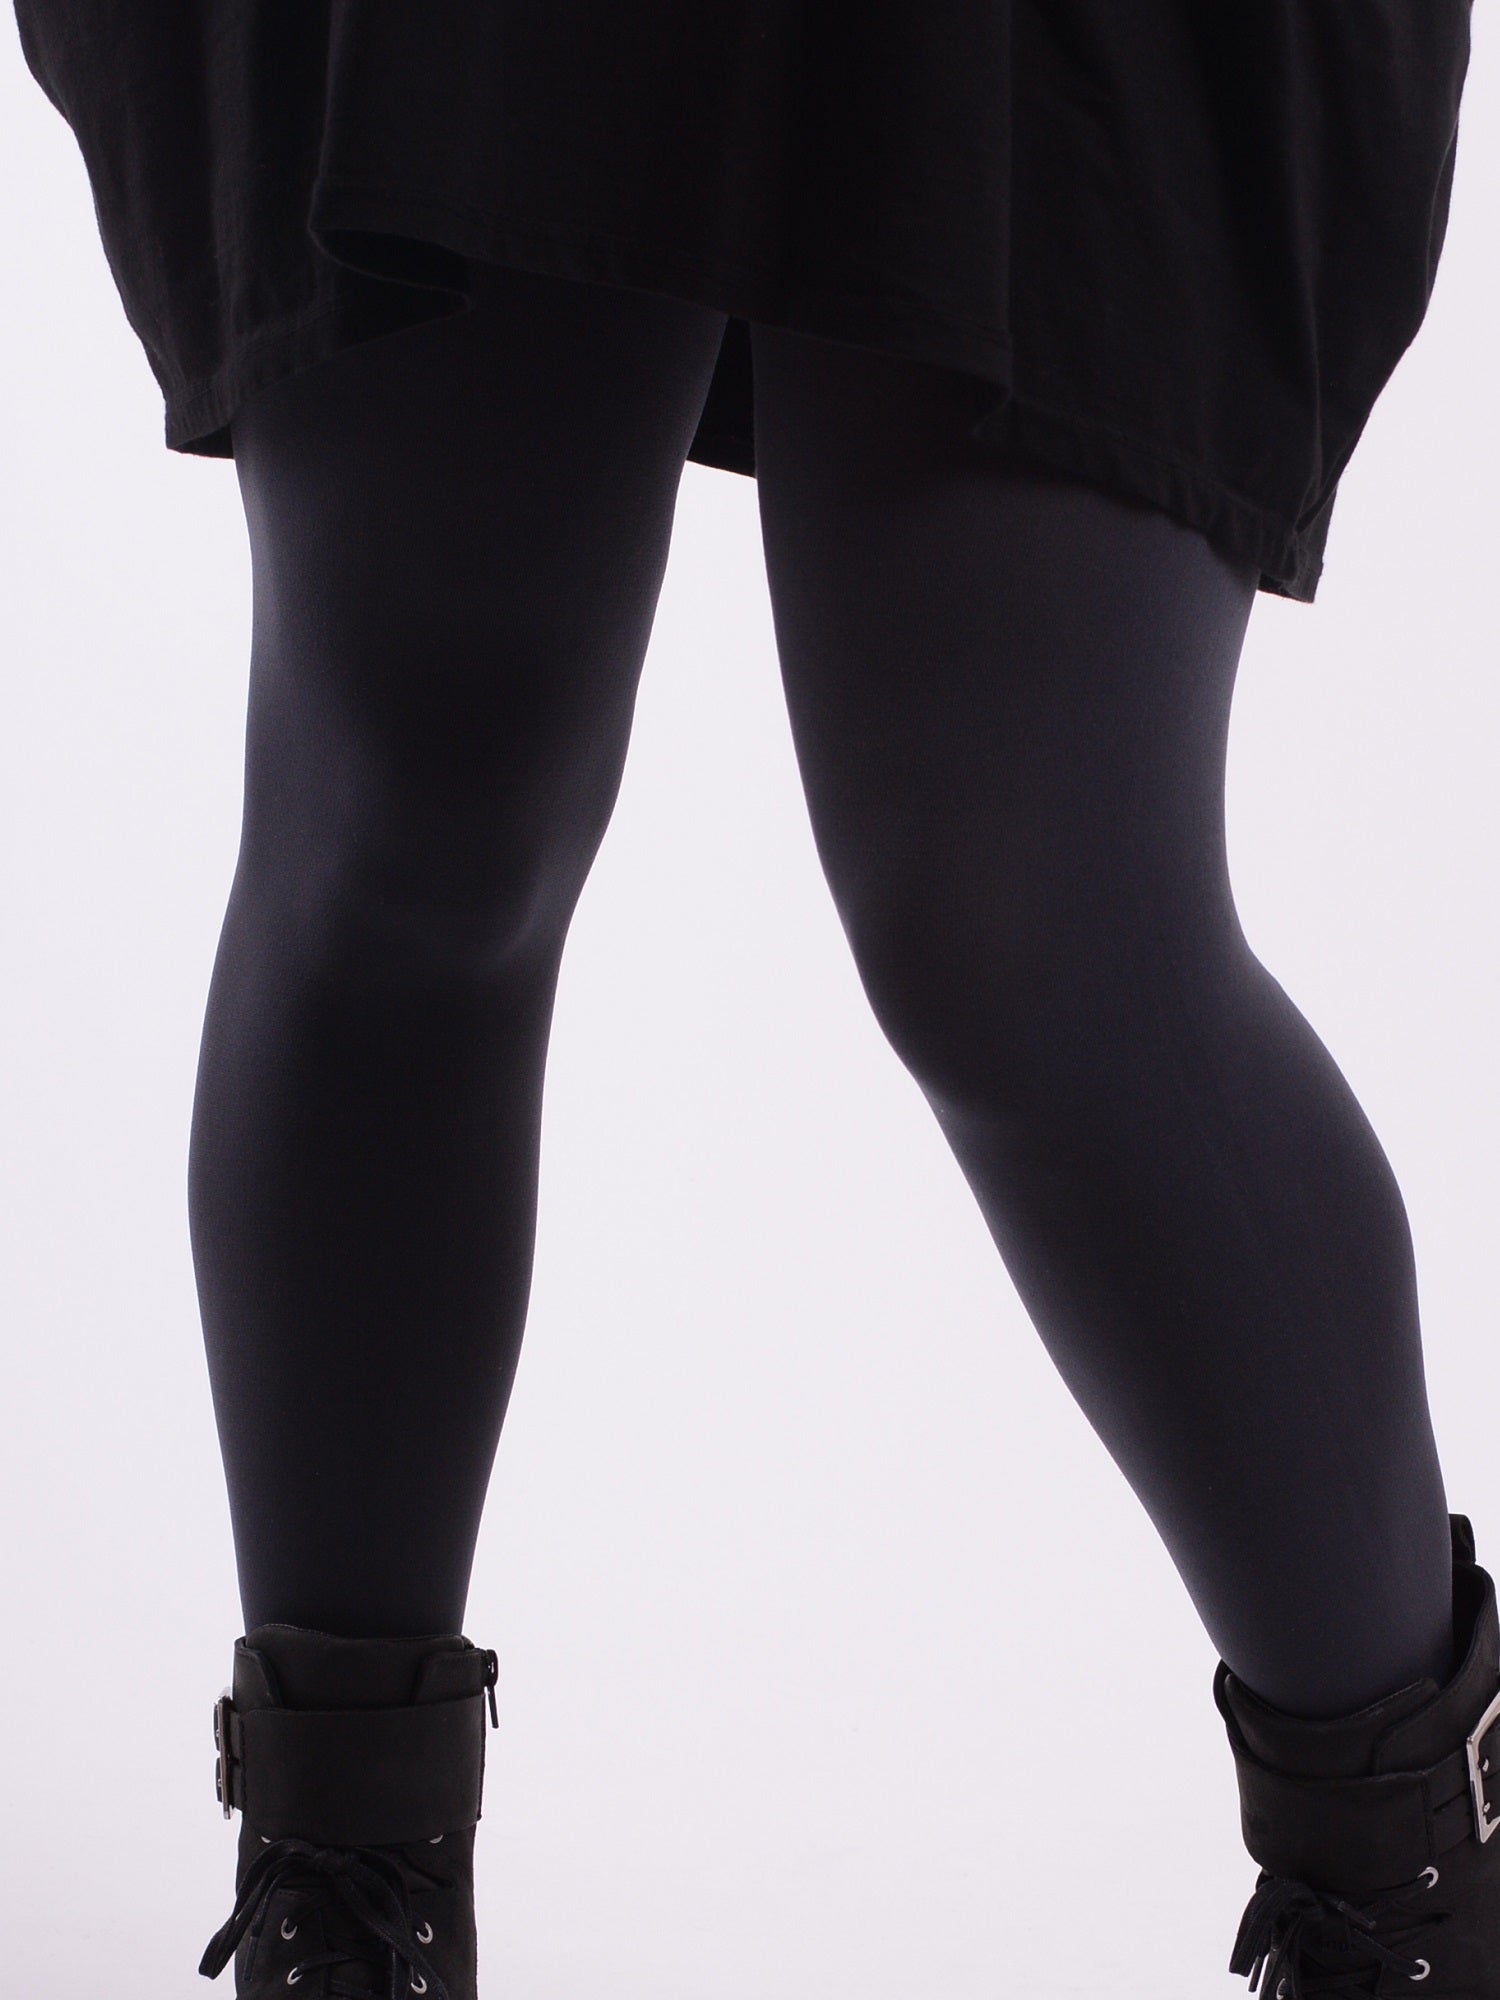 Plus Size Tights - 90 Denier, Tights, Pure Plus Clothing, Lagenlook Clothing, Plus Size Fashion, Over 50 Fashion